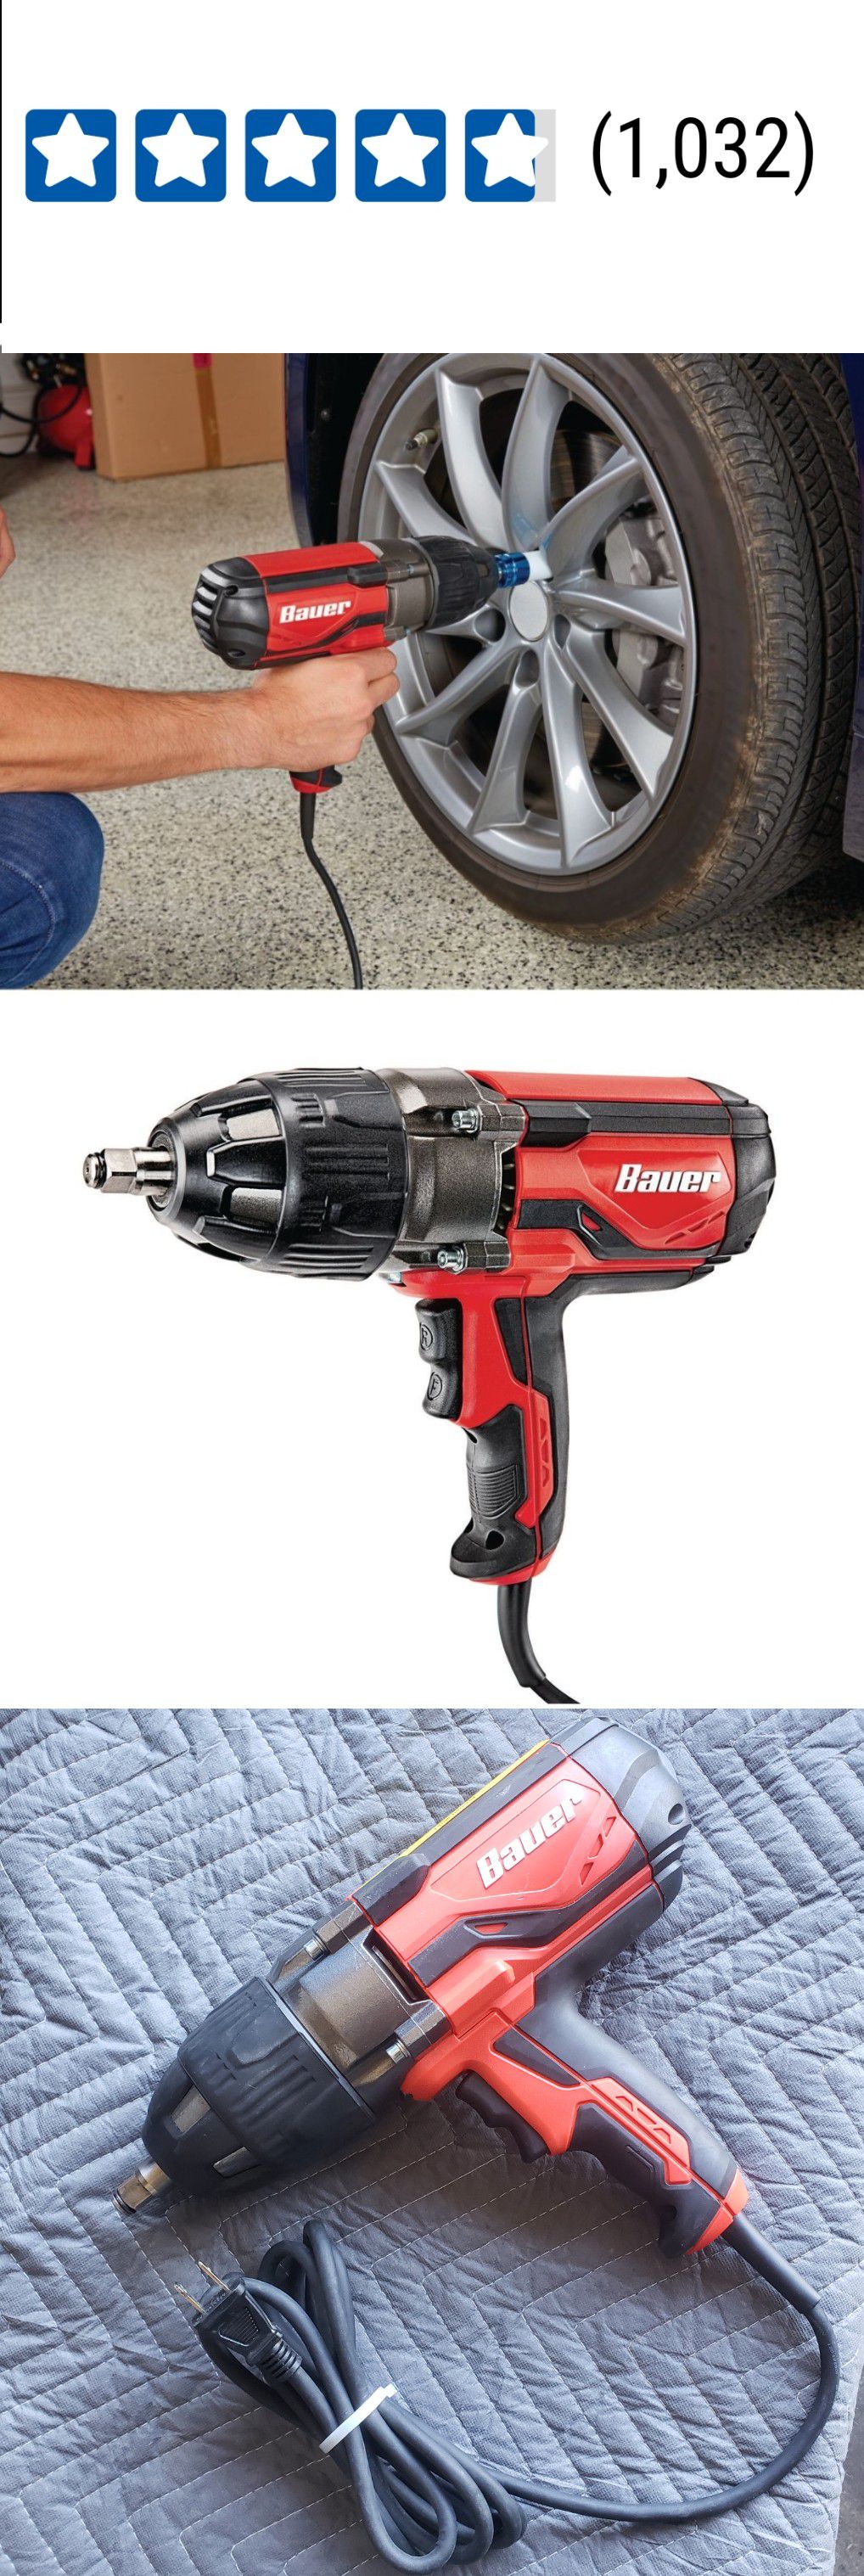 8.5 Amp Corded 1/2 In. Heavy Duty Extreme Torque Impact Wrench 1050 ft. lbs.